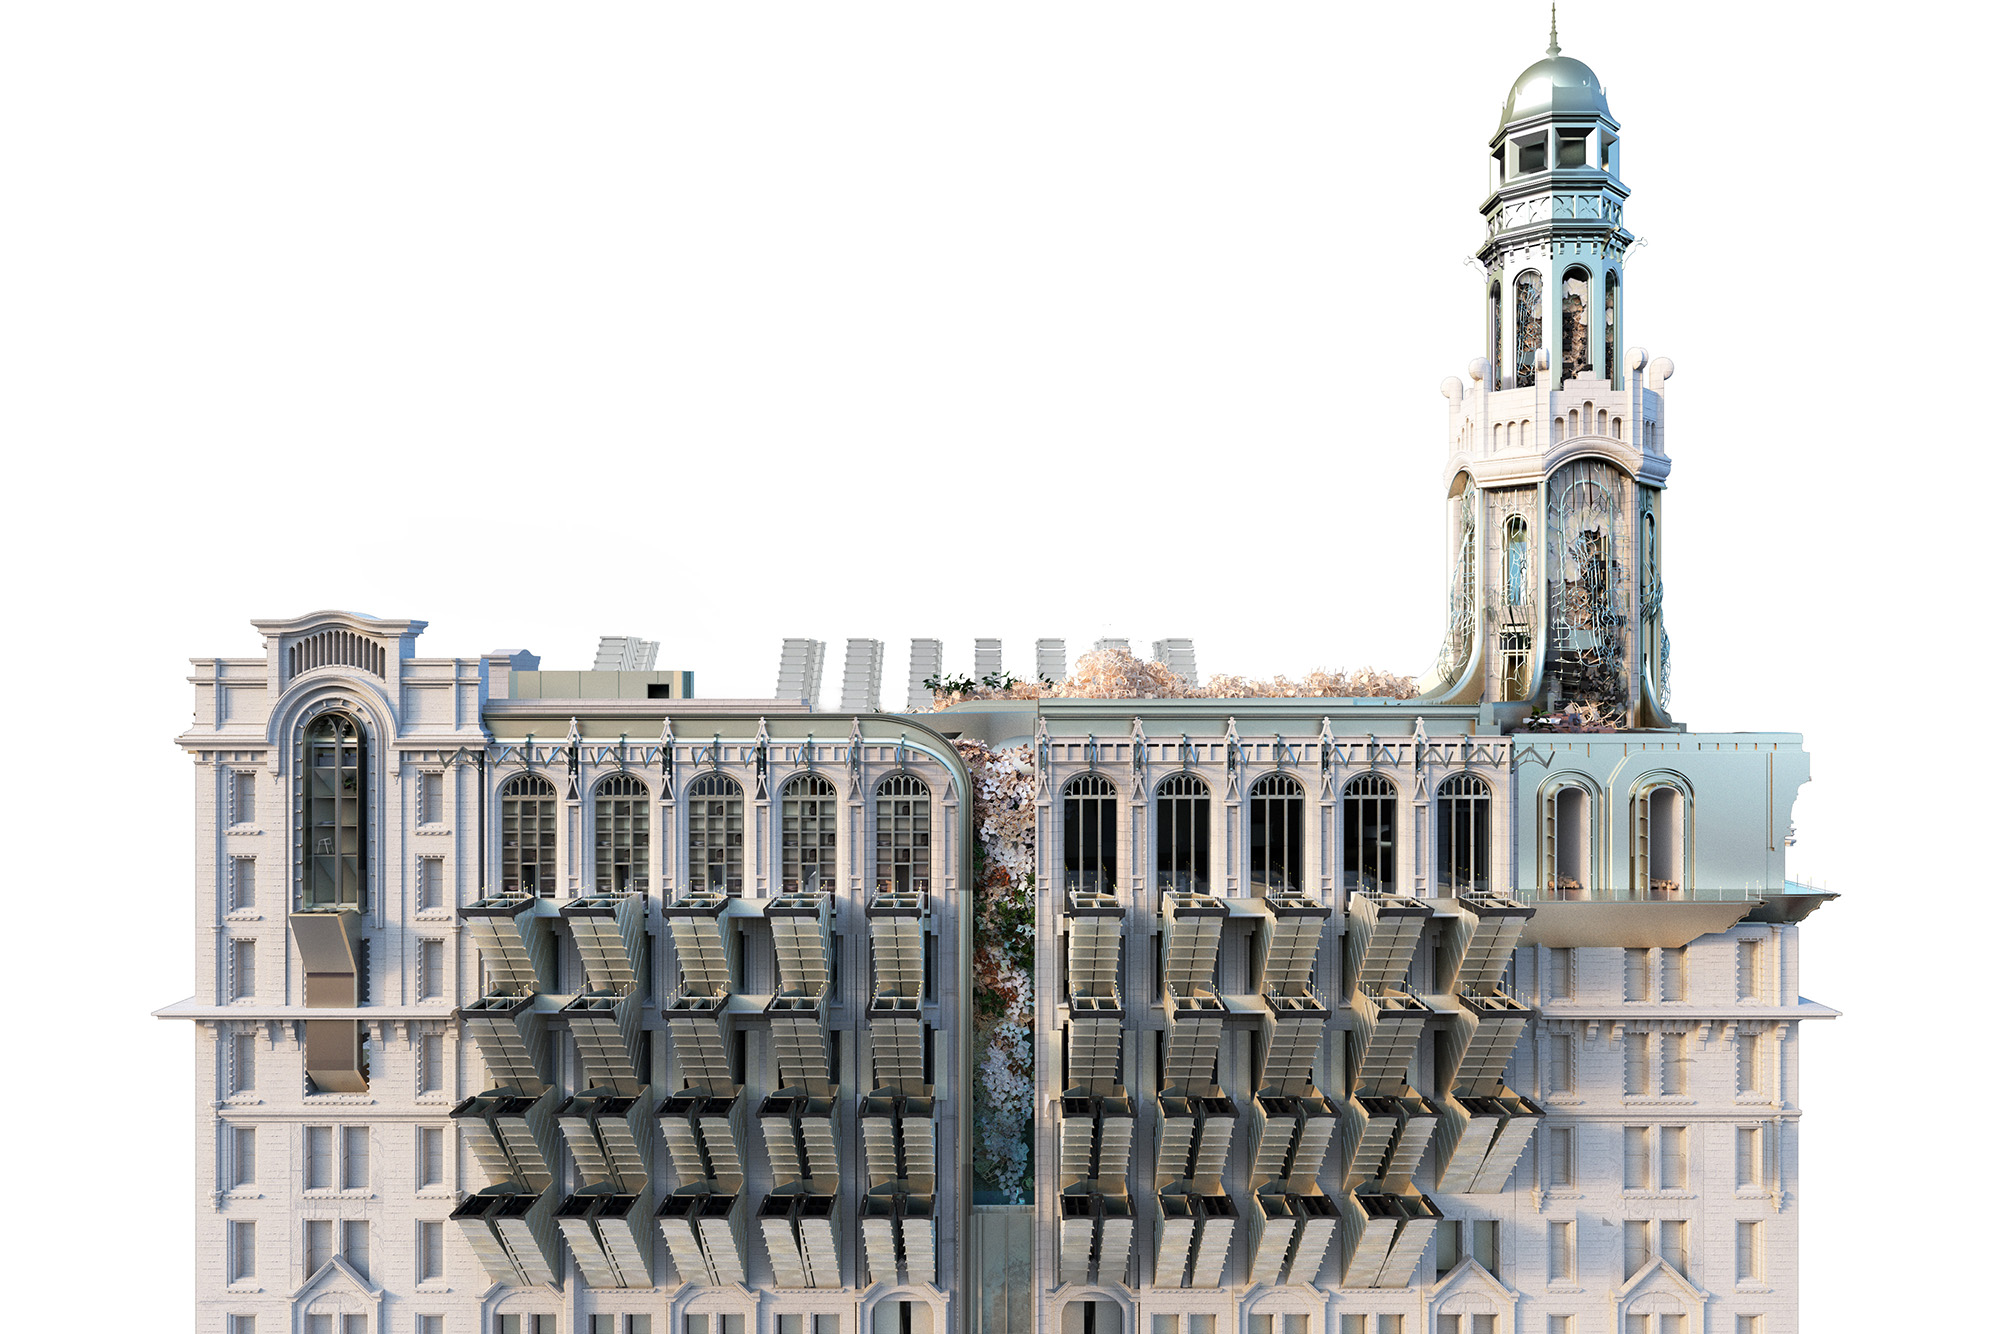 Rendering of an Art Deco building with new interventions